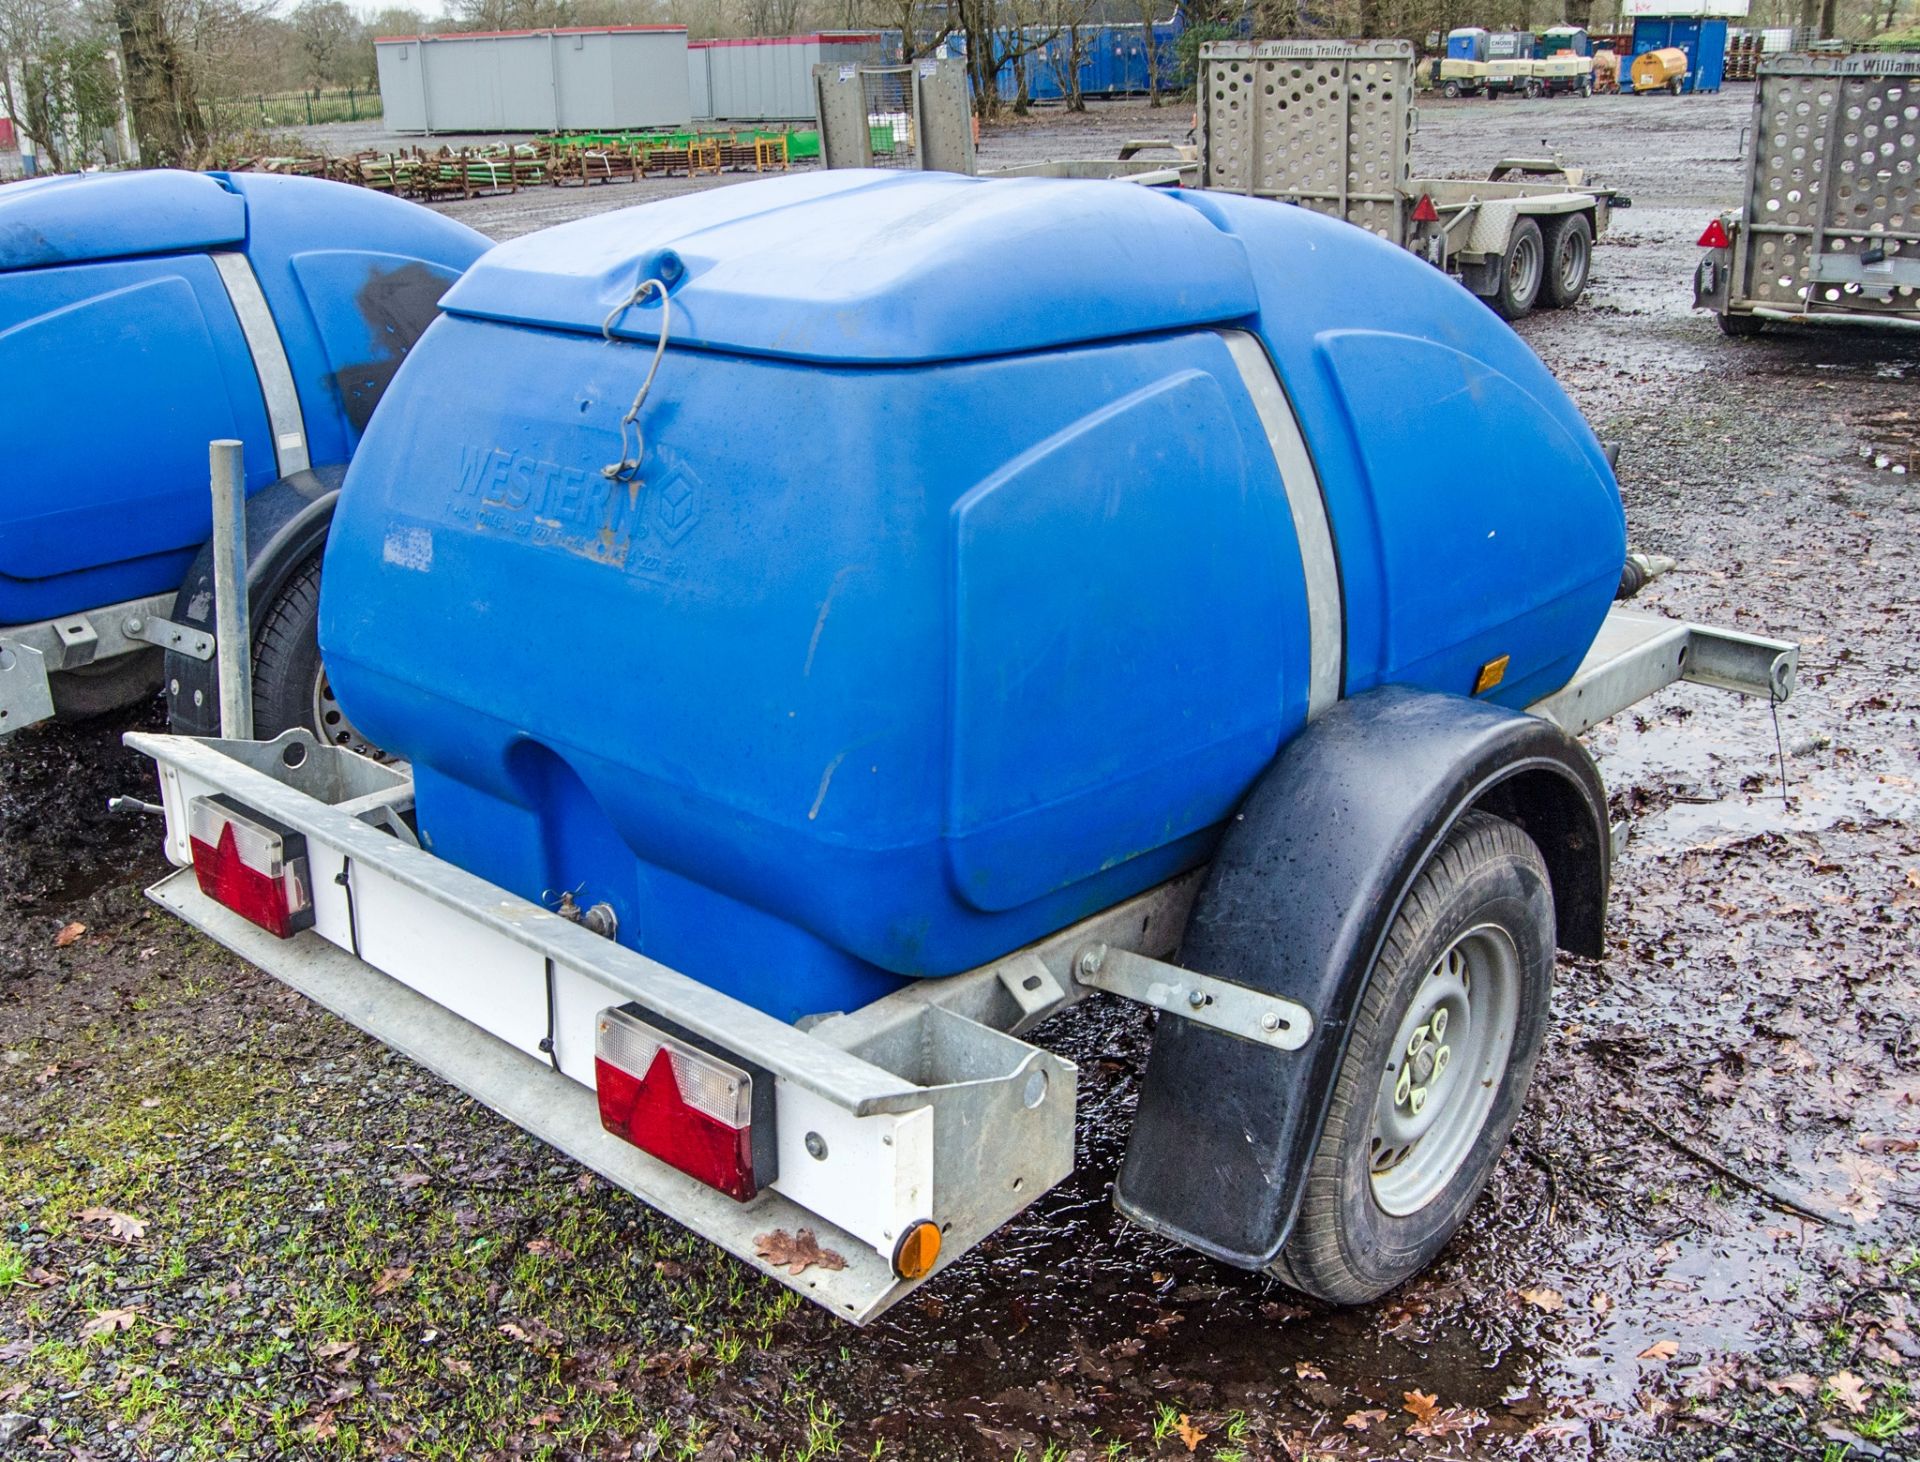 Western fast tow mobile water bowser A838287 - Image 2 of 4